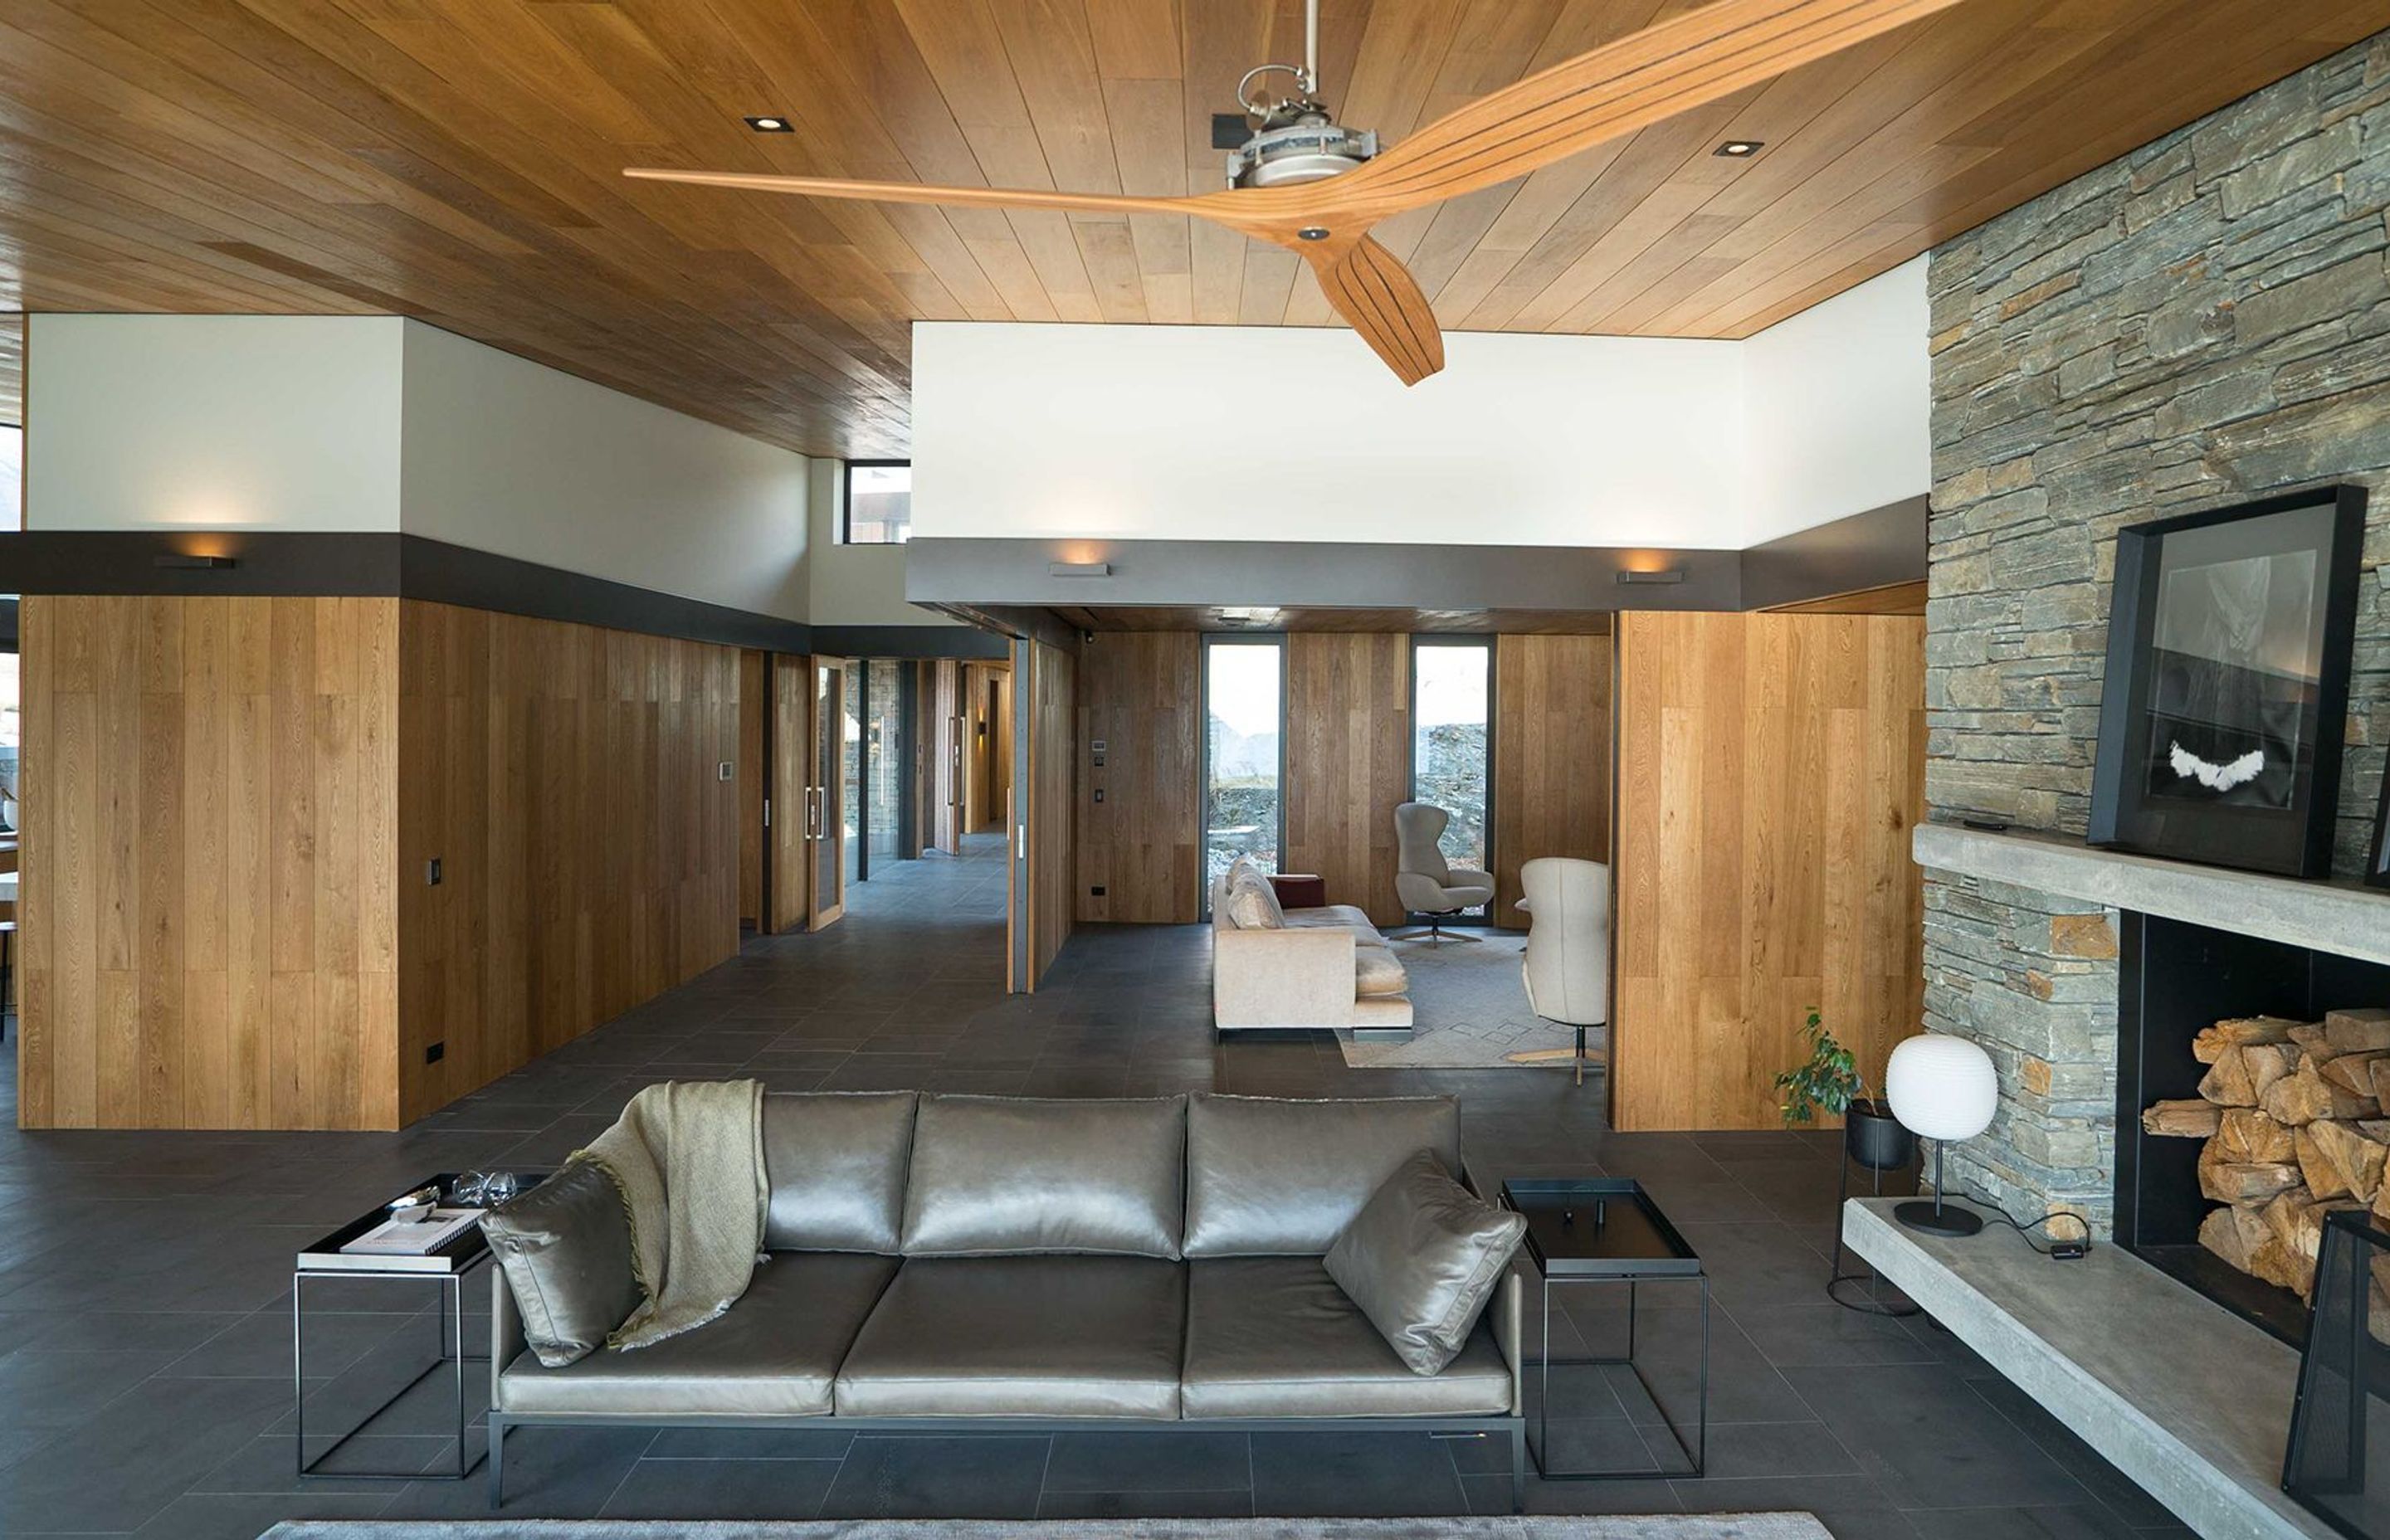 Oak-panelled walls and ceiling adds warmth to the Timaru bluestone flooring and Alexandra schist feature wall. Photograph: ArchiPro.